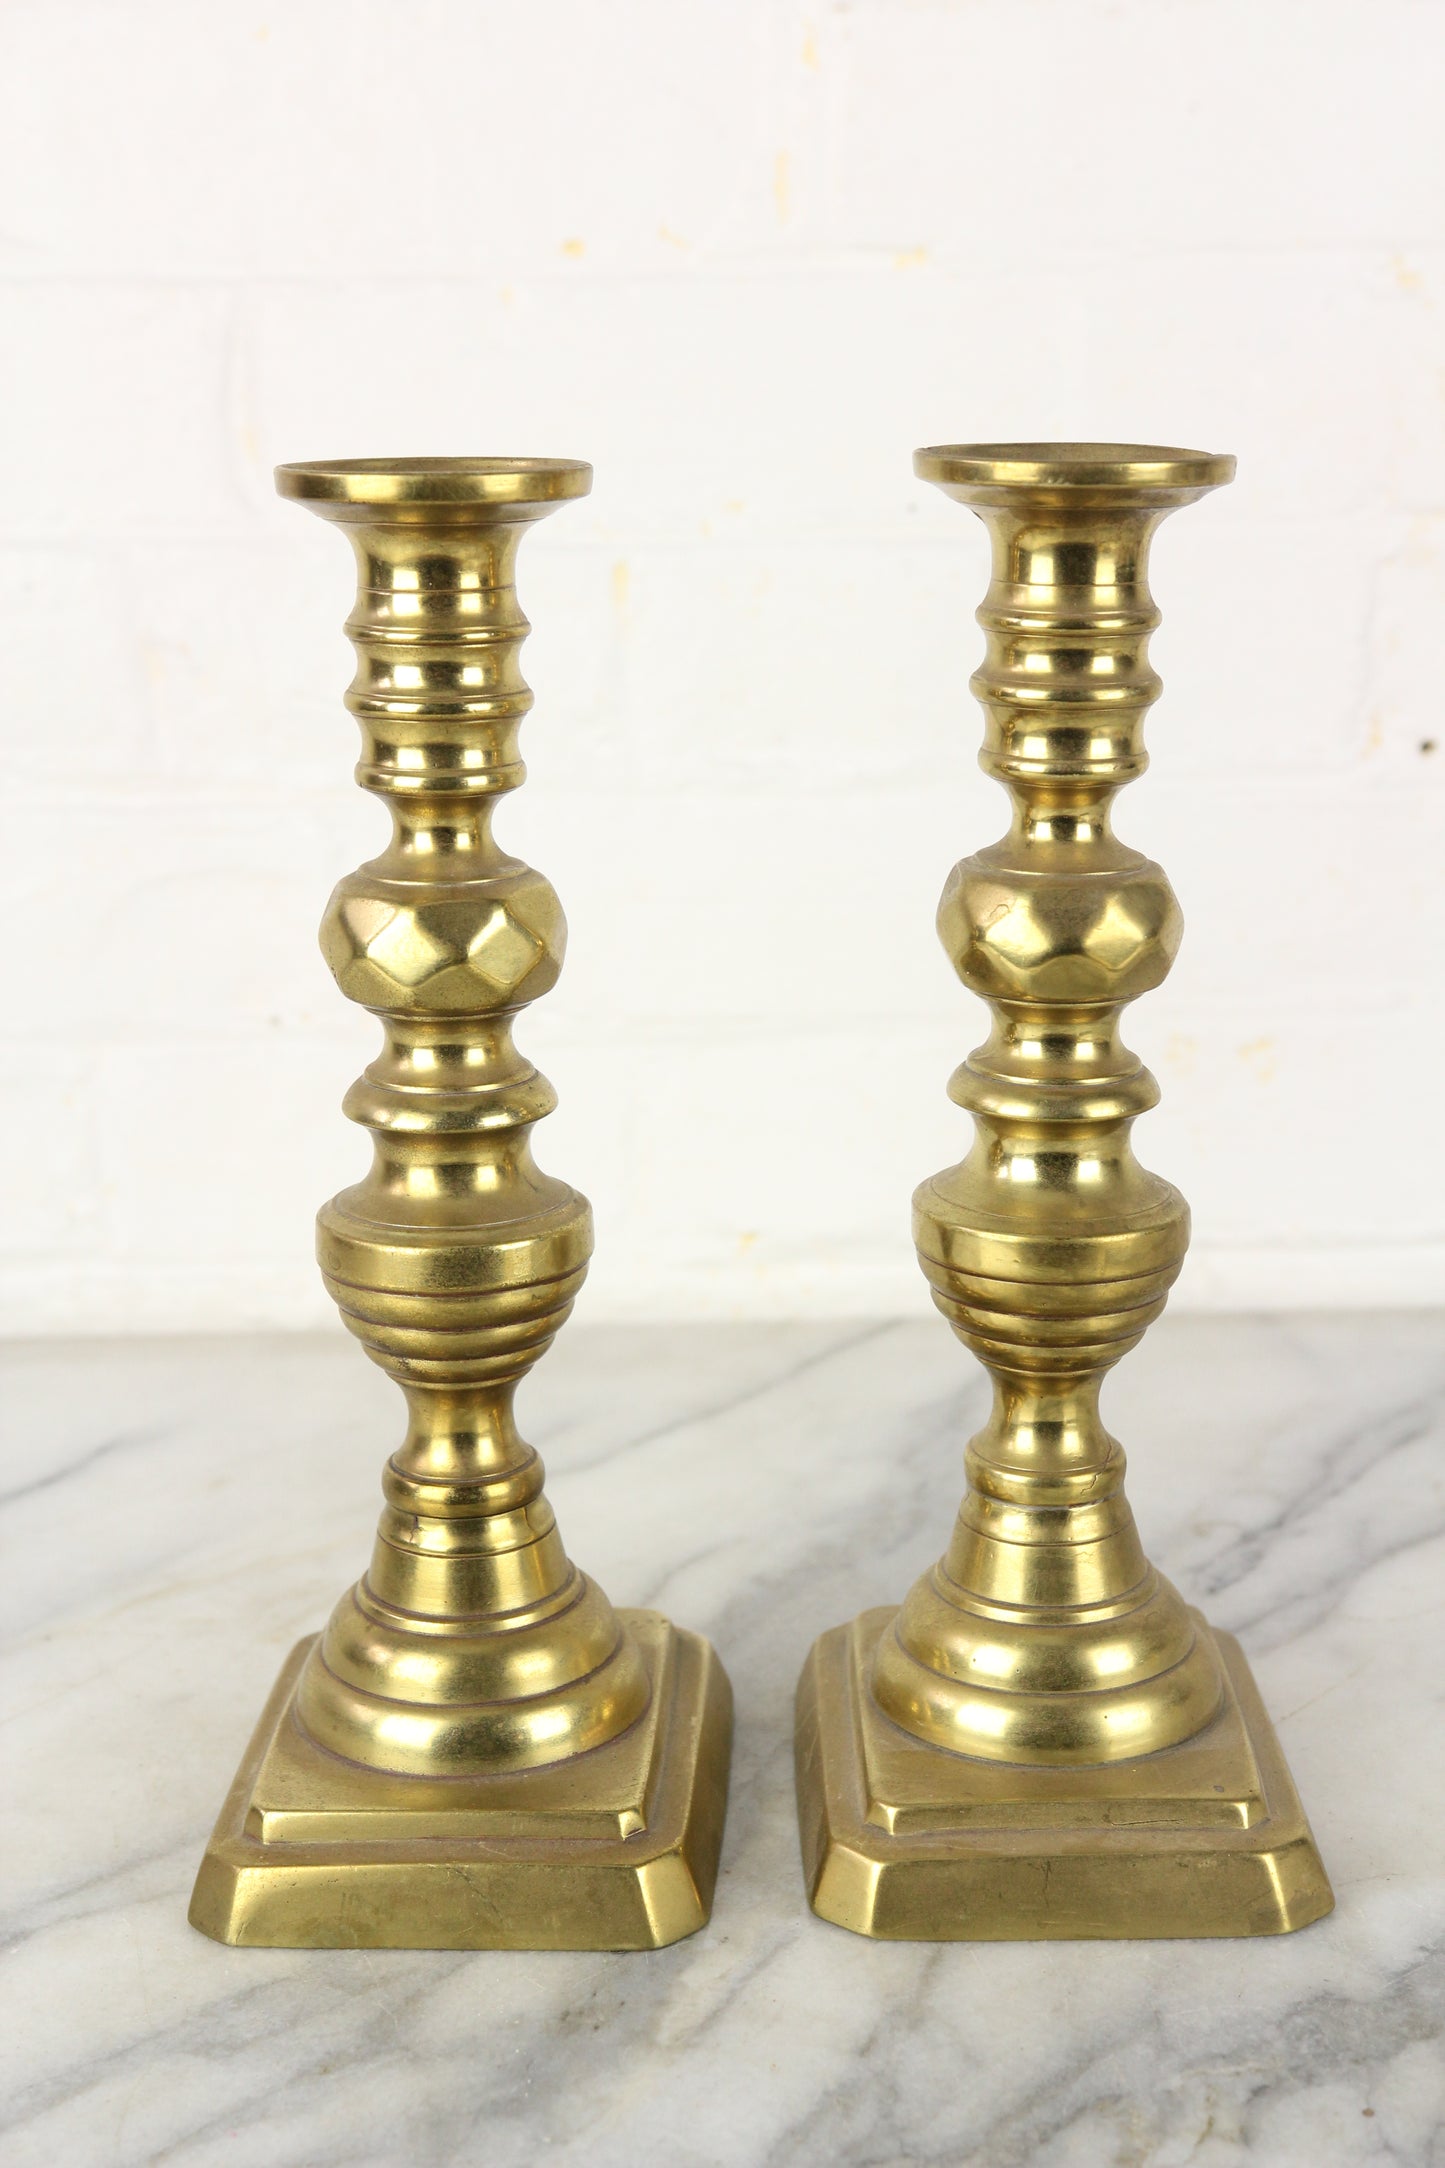 Solid Brass Push-Up Candlesticks, Pair - 9.75"